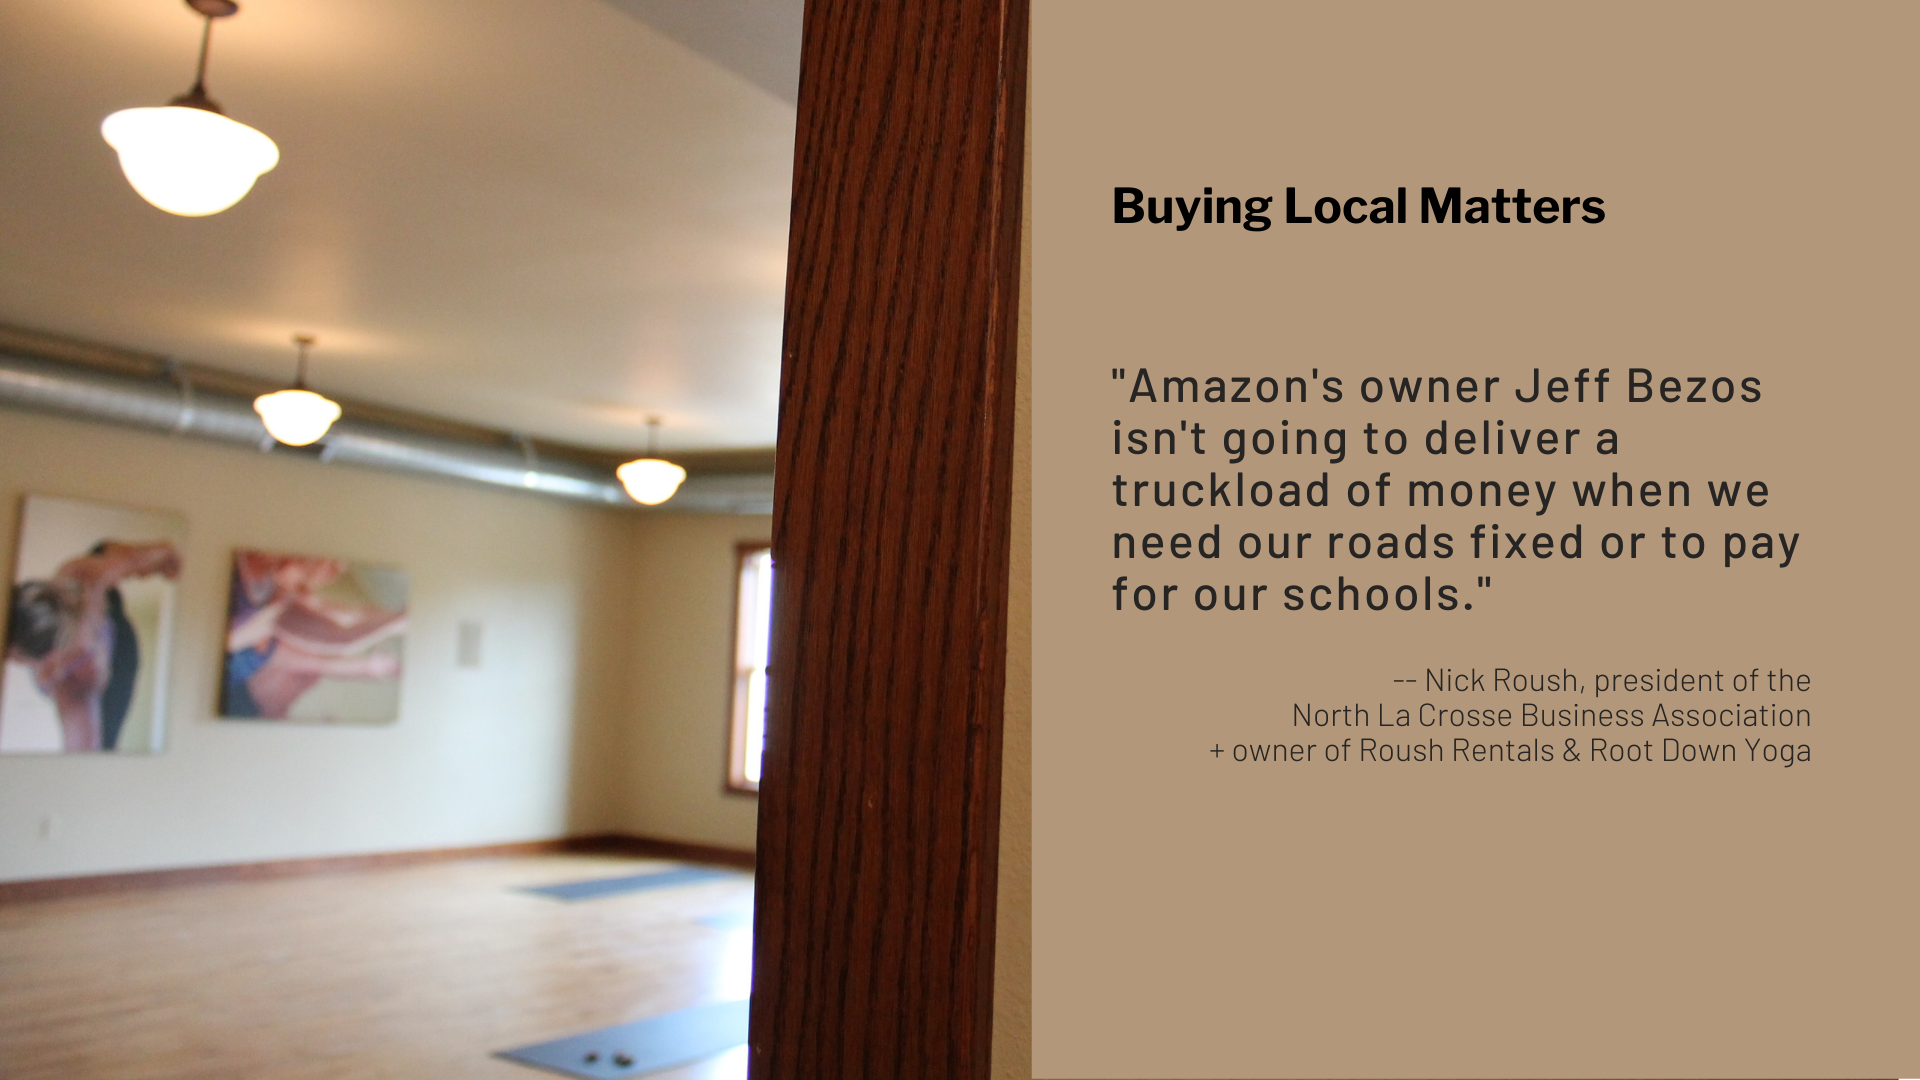 Amazon's owner Jeff Bezos isn't going to deliver a truckload of money when we need our roads fixed or to pay for our schools." - nick Roush